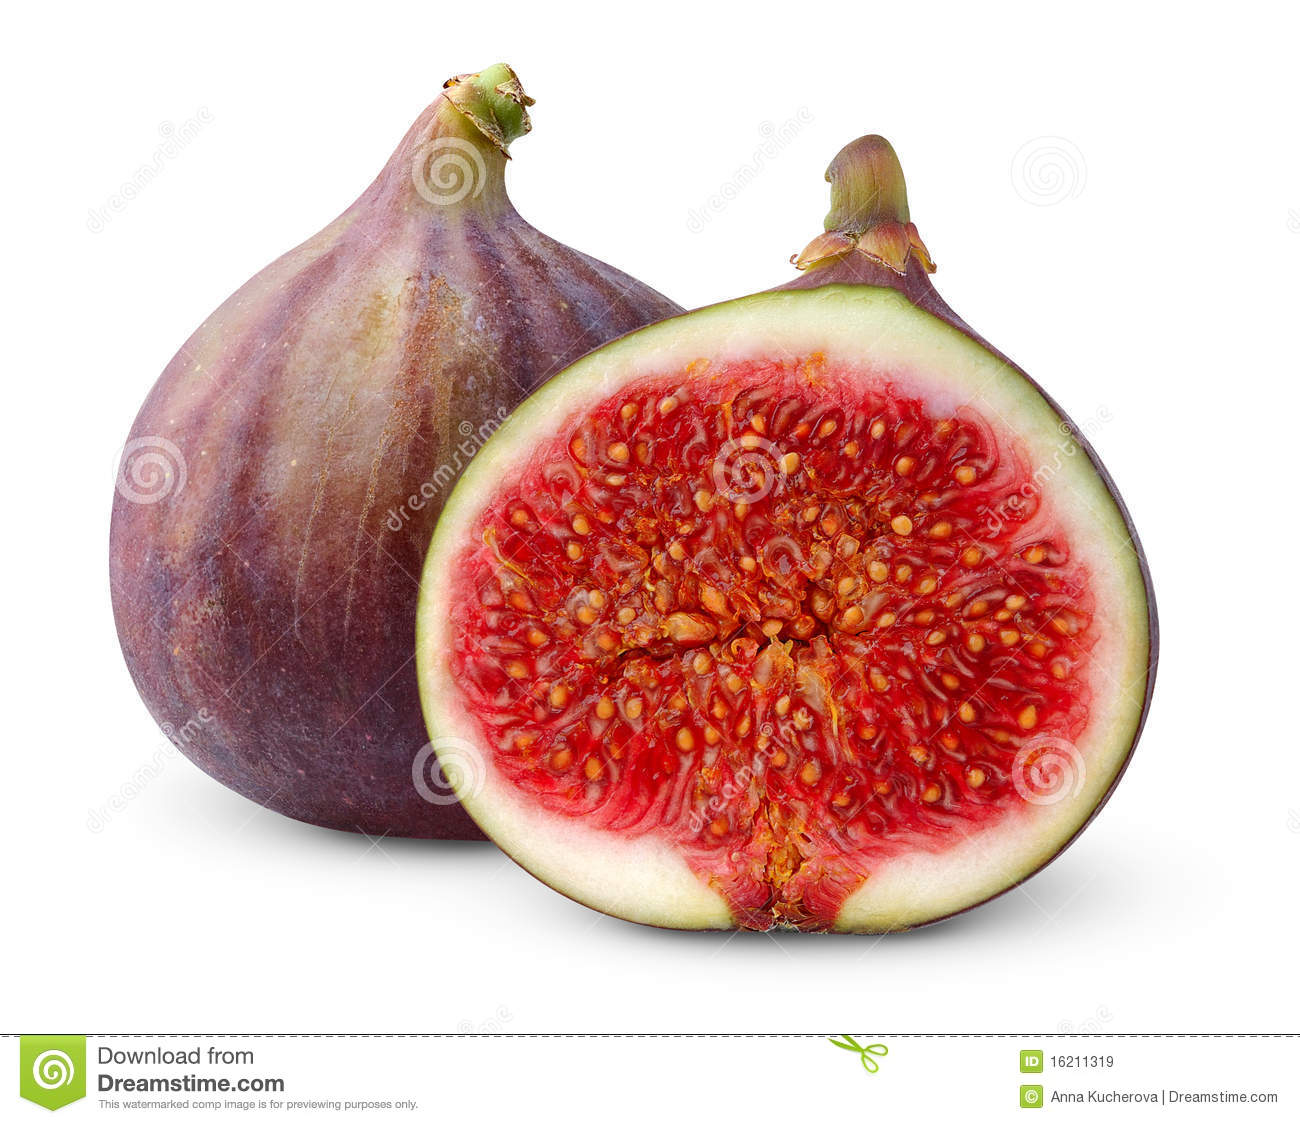 Fresh Figs Royalty Free Stock Images   Image  16211319